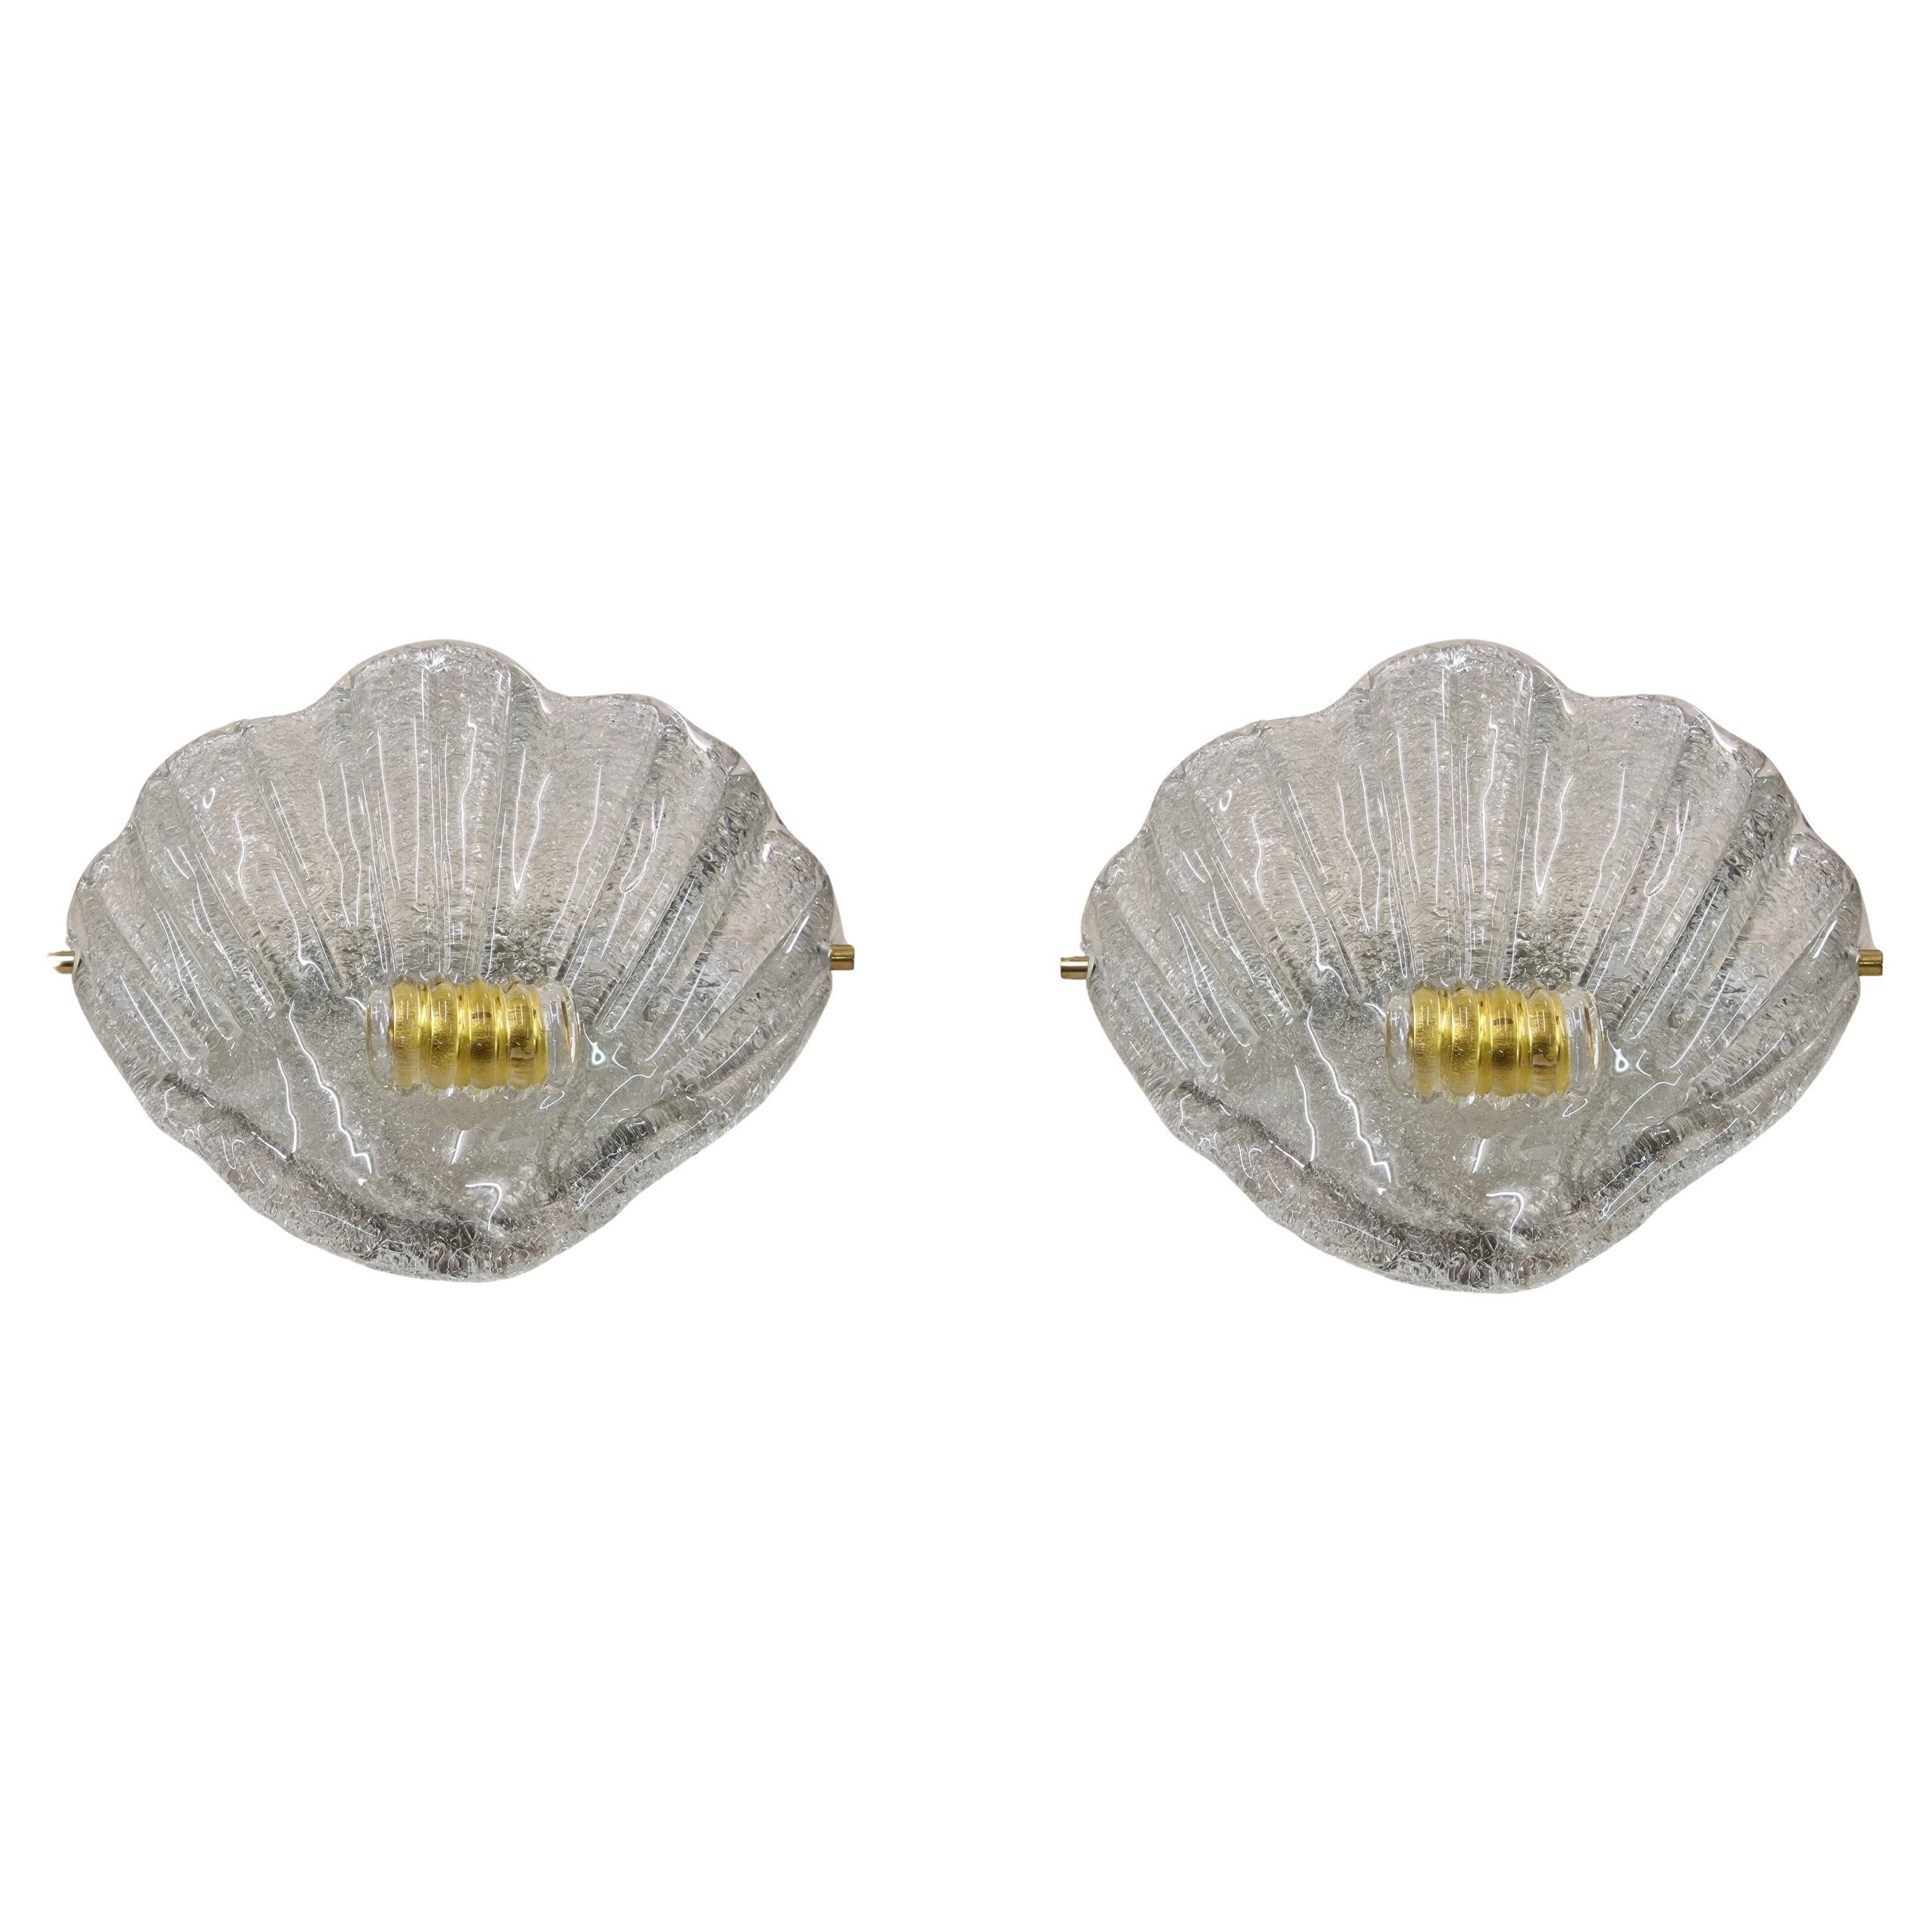 Pair of wall lights, appliques, shell, 1980s Murano design Barovier & Toso Italy For Sale